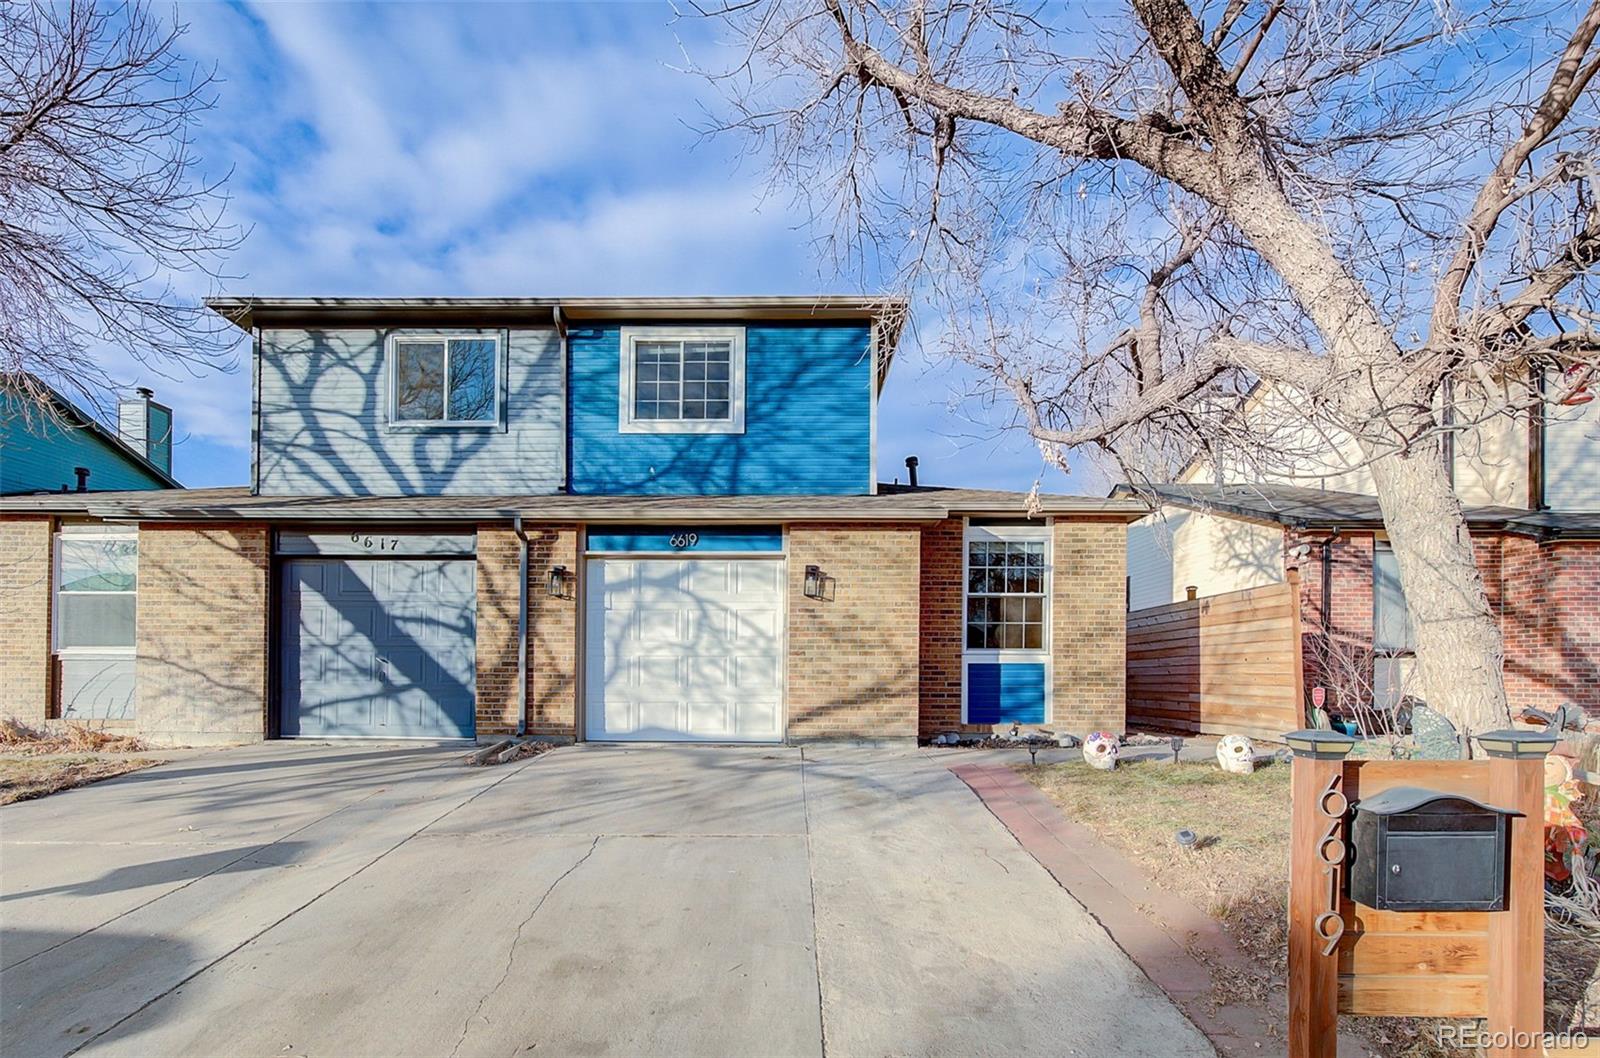 Report Image for 6619 E 62nd Place,Commerce City, Colorado